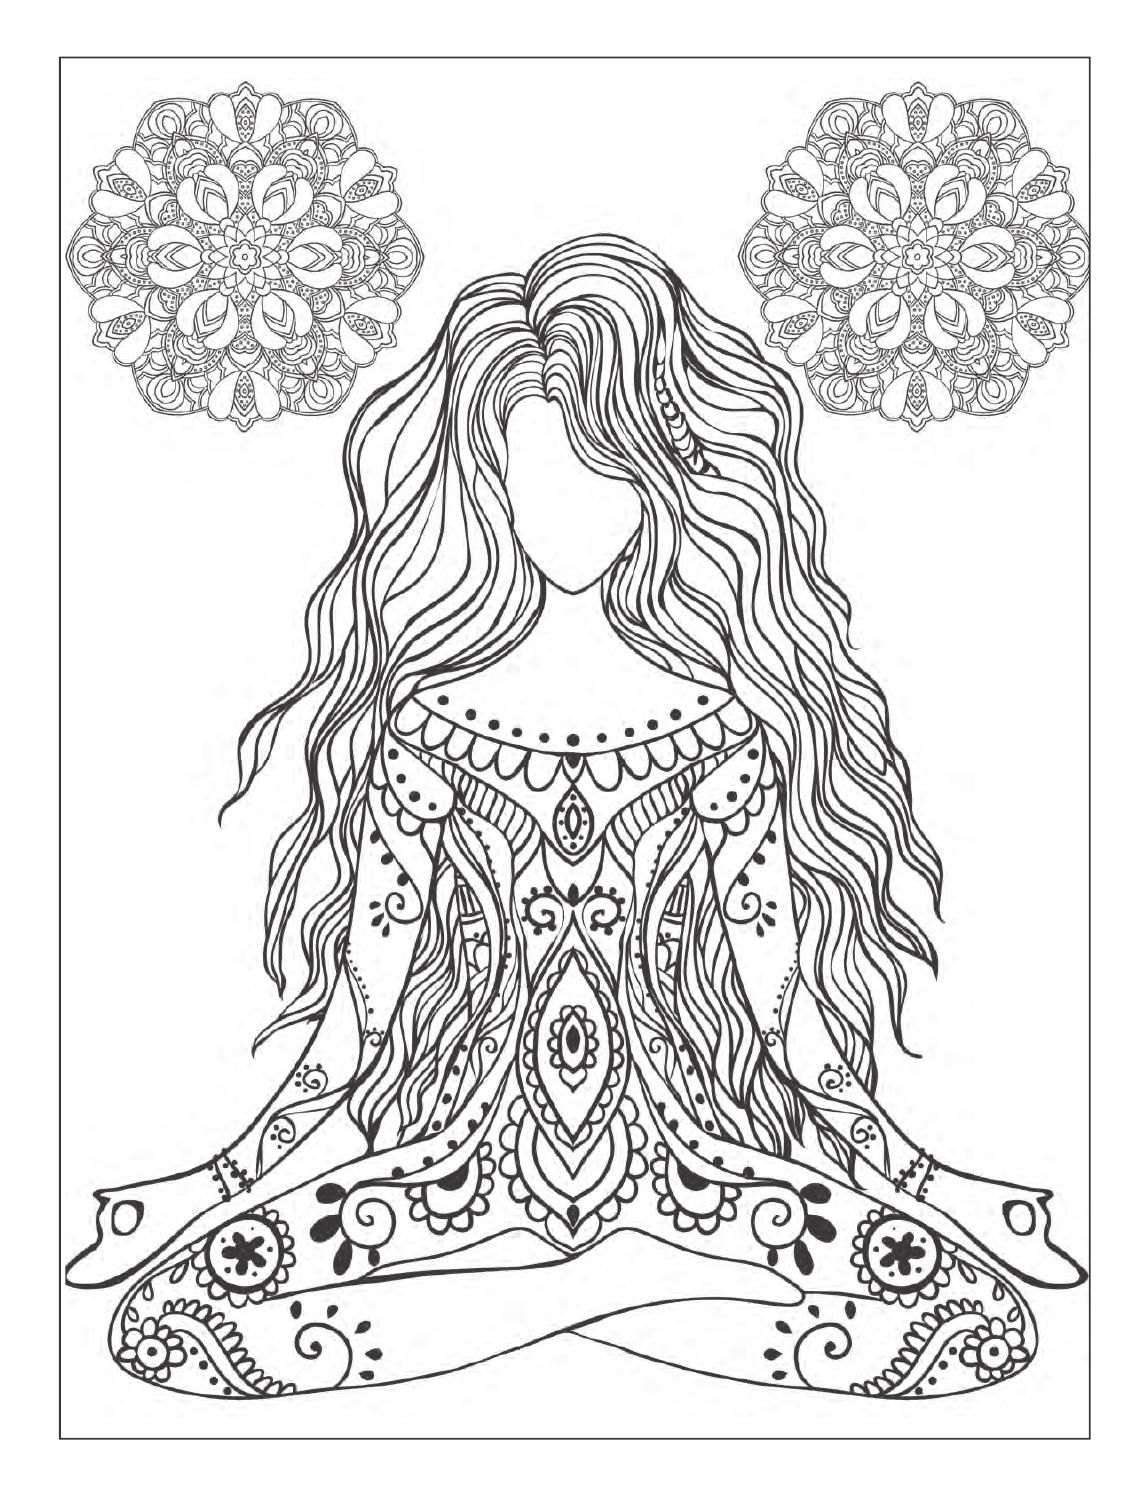 MINDFULNESS COLORING BOOK FOR ADULTS : Peaceful Zen Coloring Book